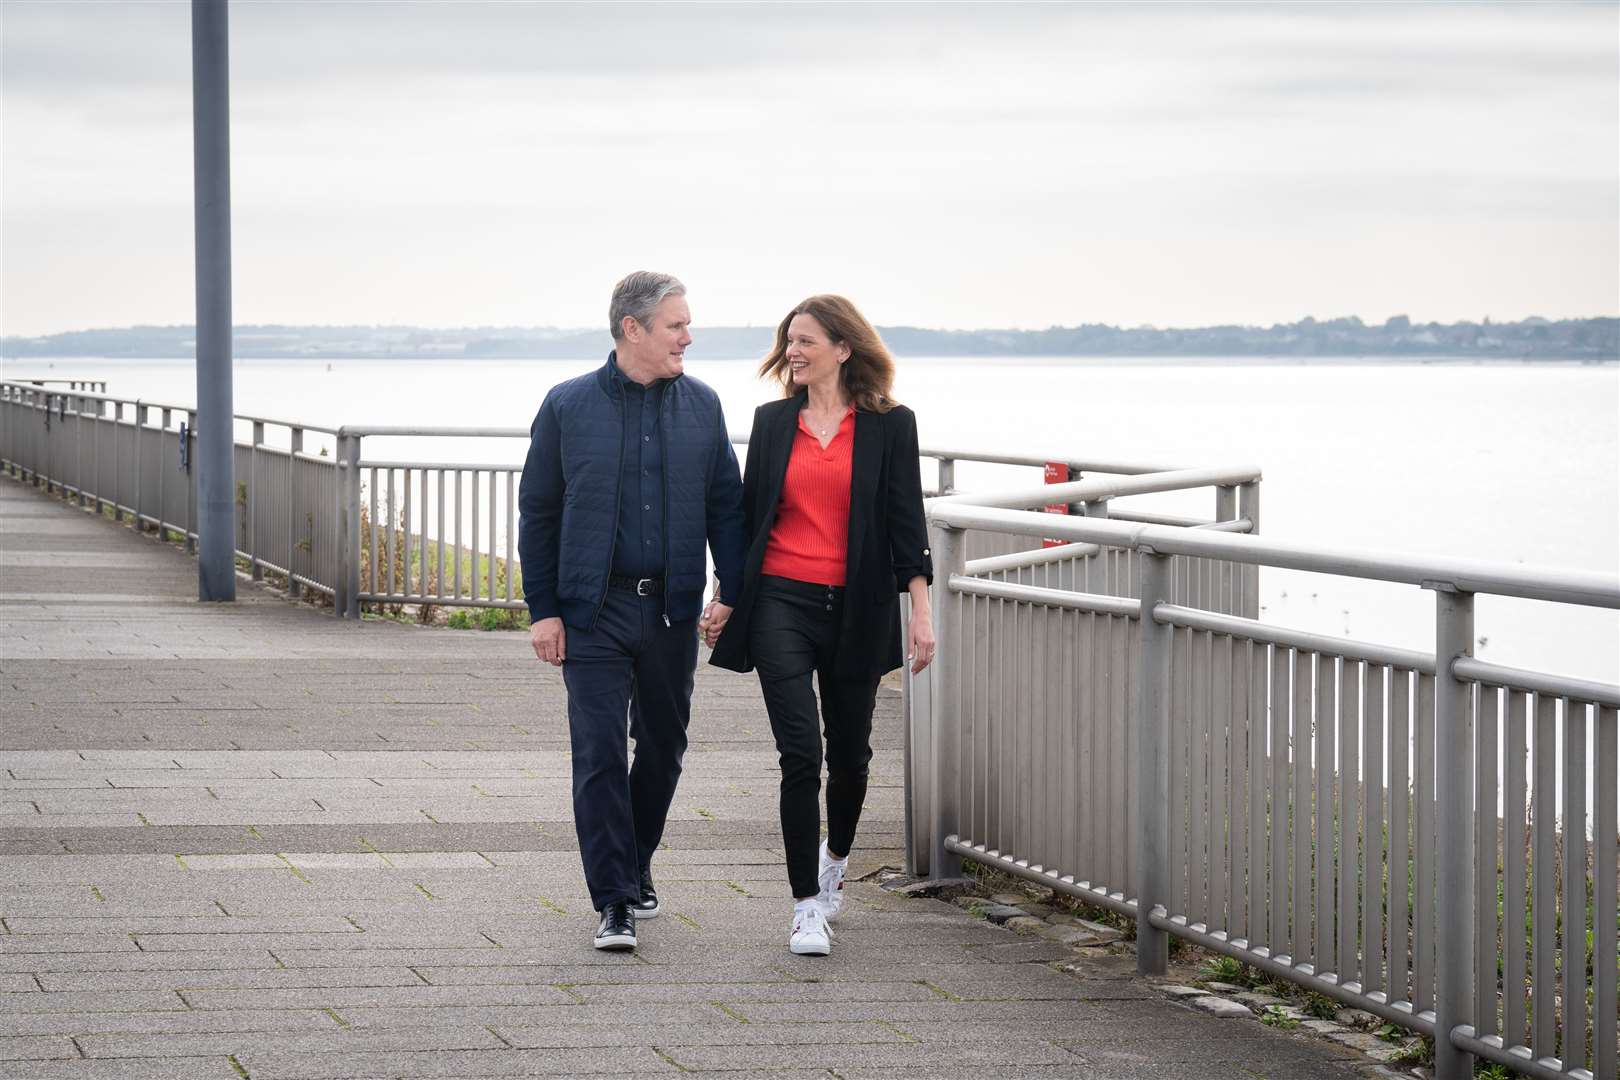 Labour leader Sir Keir Starmer and his wife Victoria on the banks of the Mersey in Liverpool (Stefan Rousseau/PA)